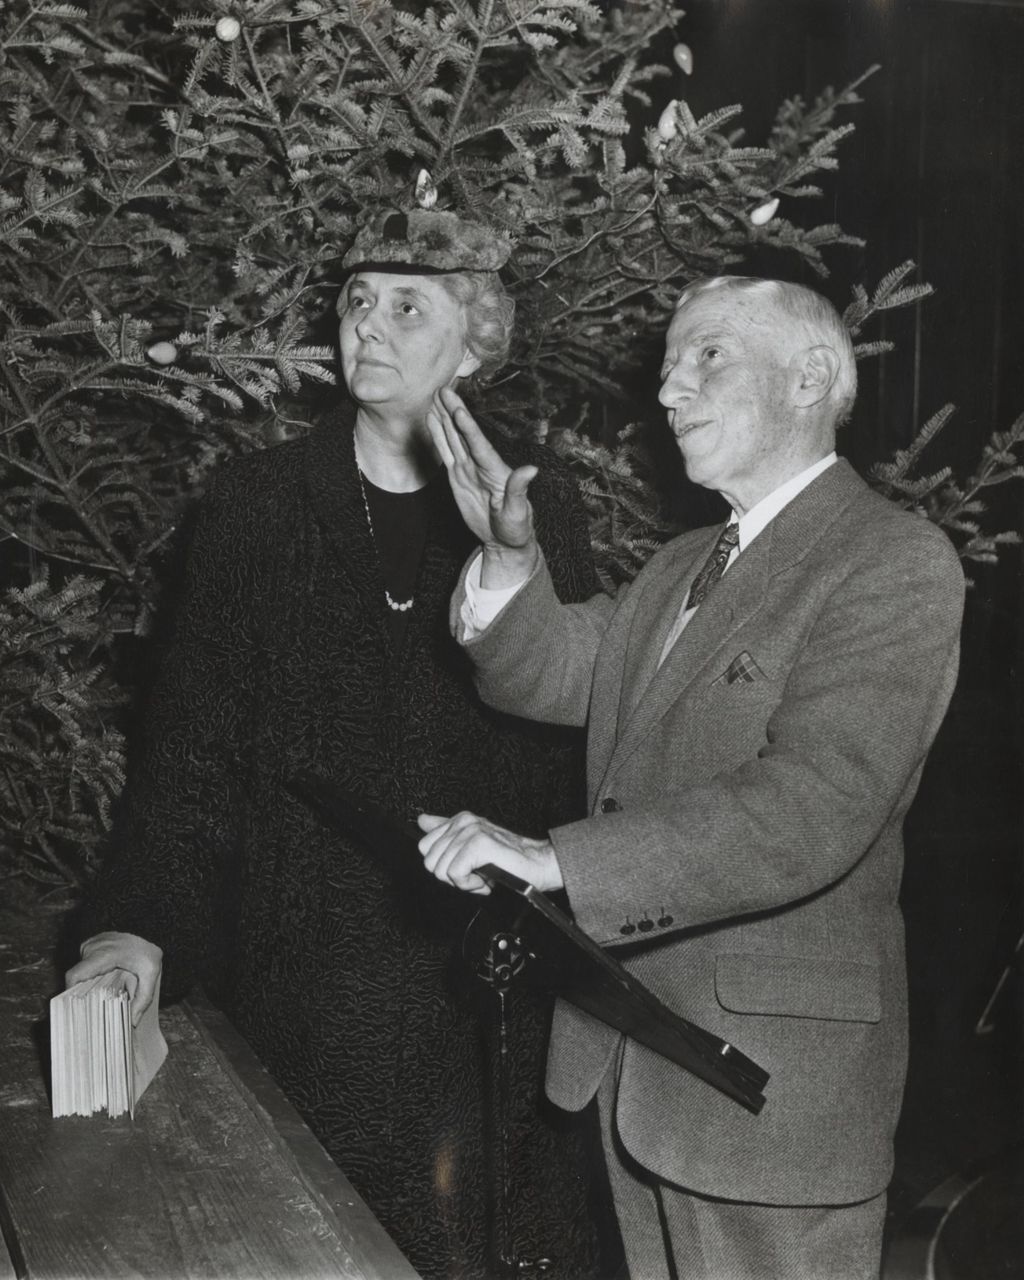 Miniature of Hull-House board president Alma Petersen stands next to man at Hull-House event during Christmas season